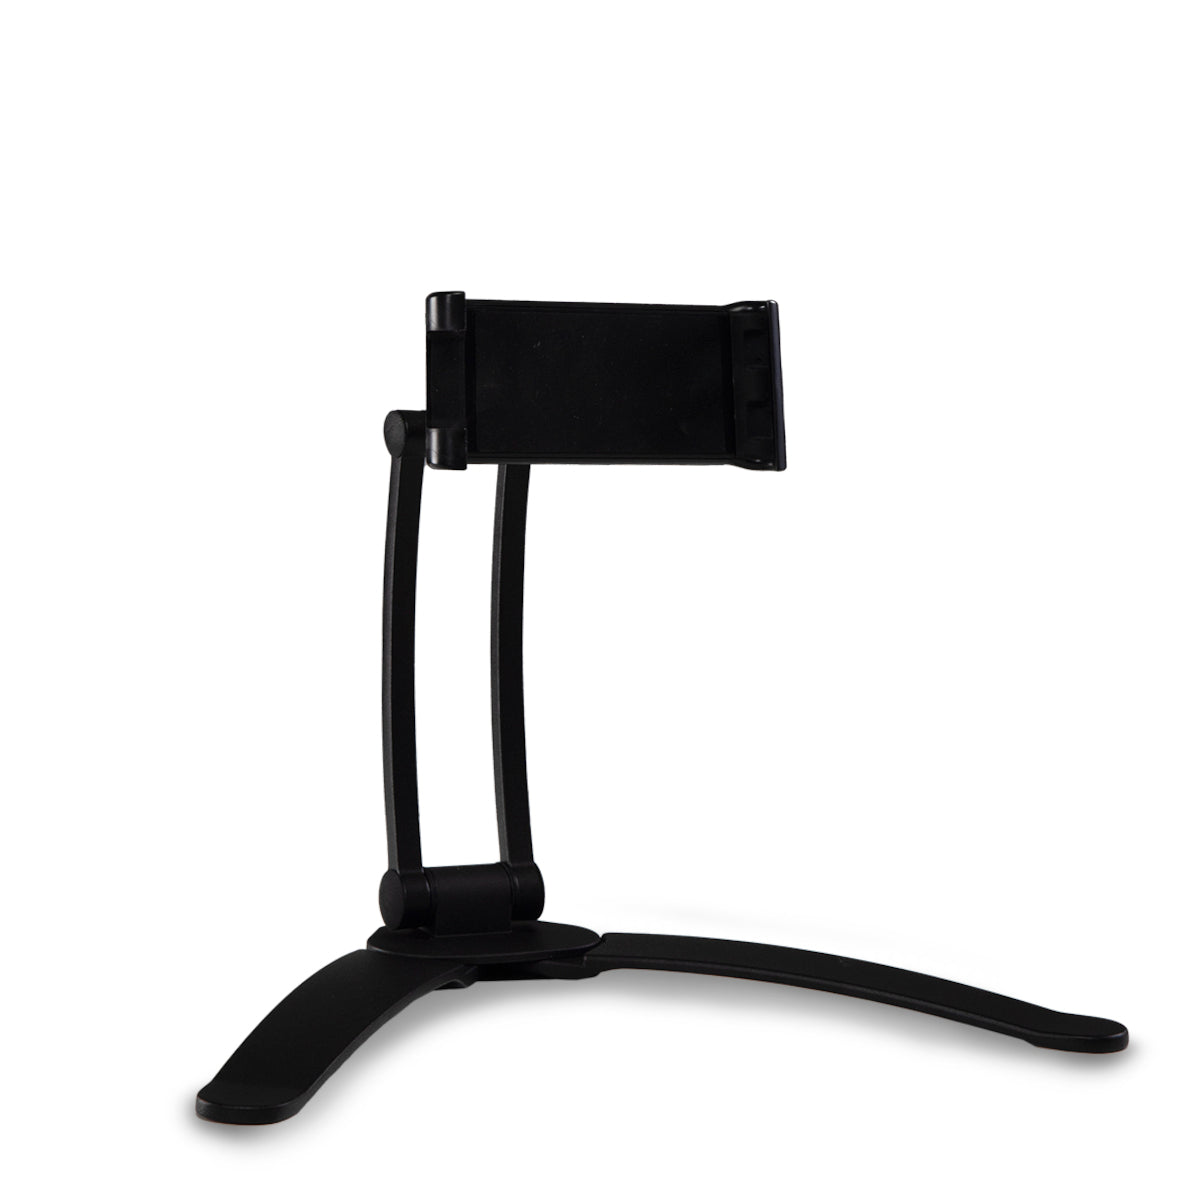 A Sleek black plastic stand for Tablet or Smartphone.  The stand has large but slim looking feet splaying out at 30 degree angles at the base. 